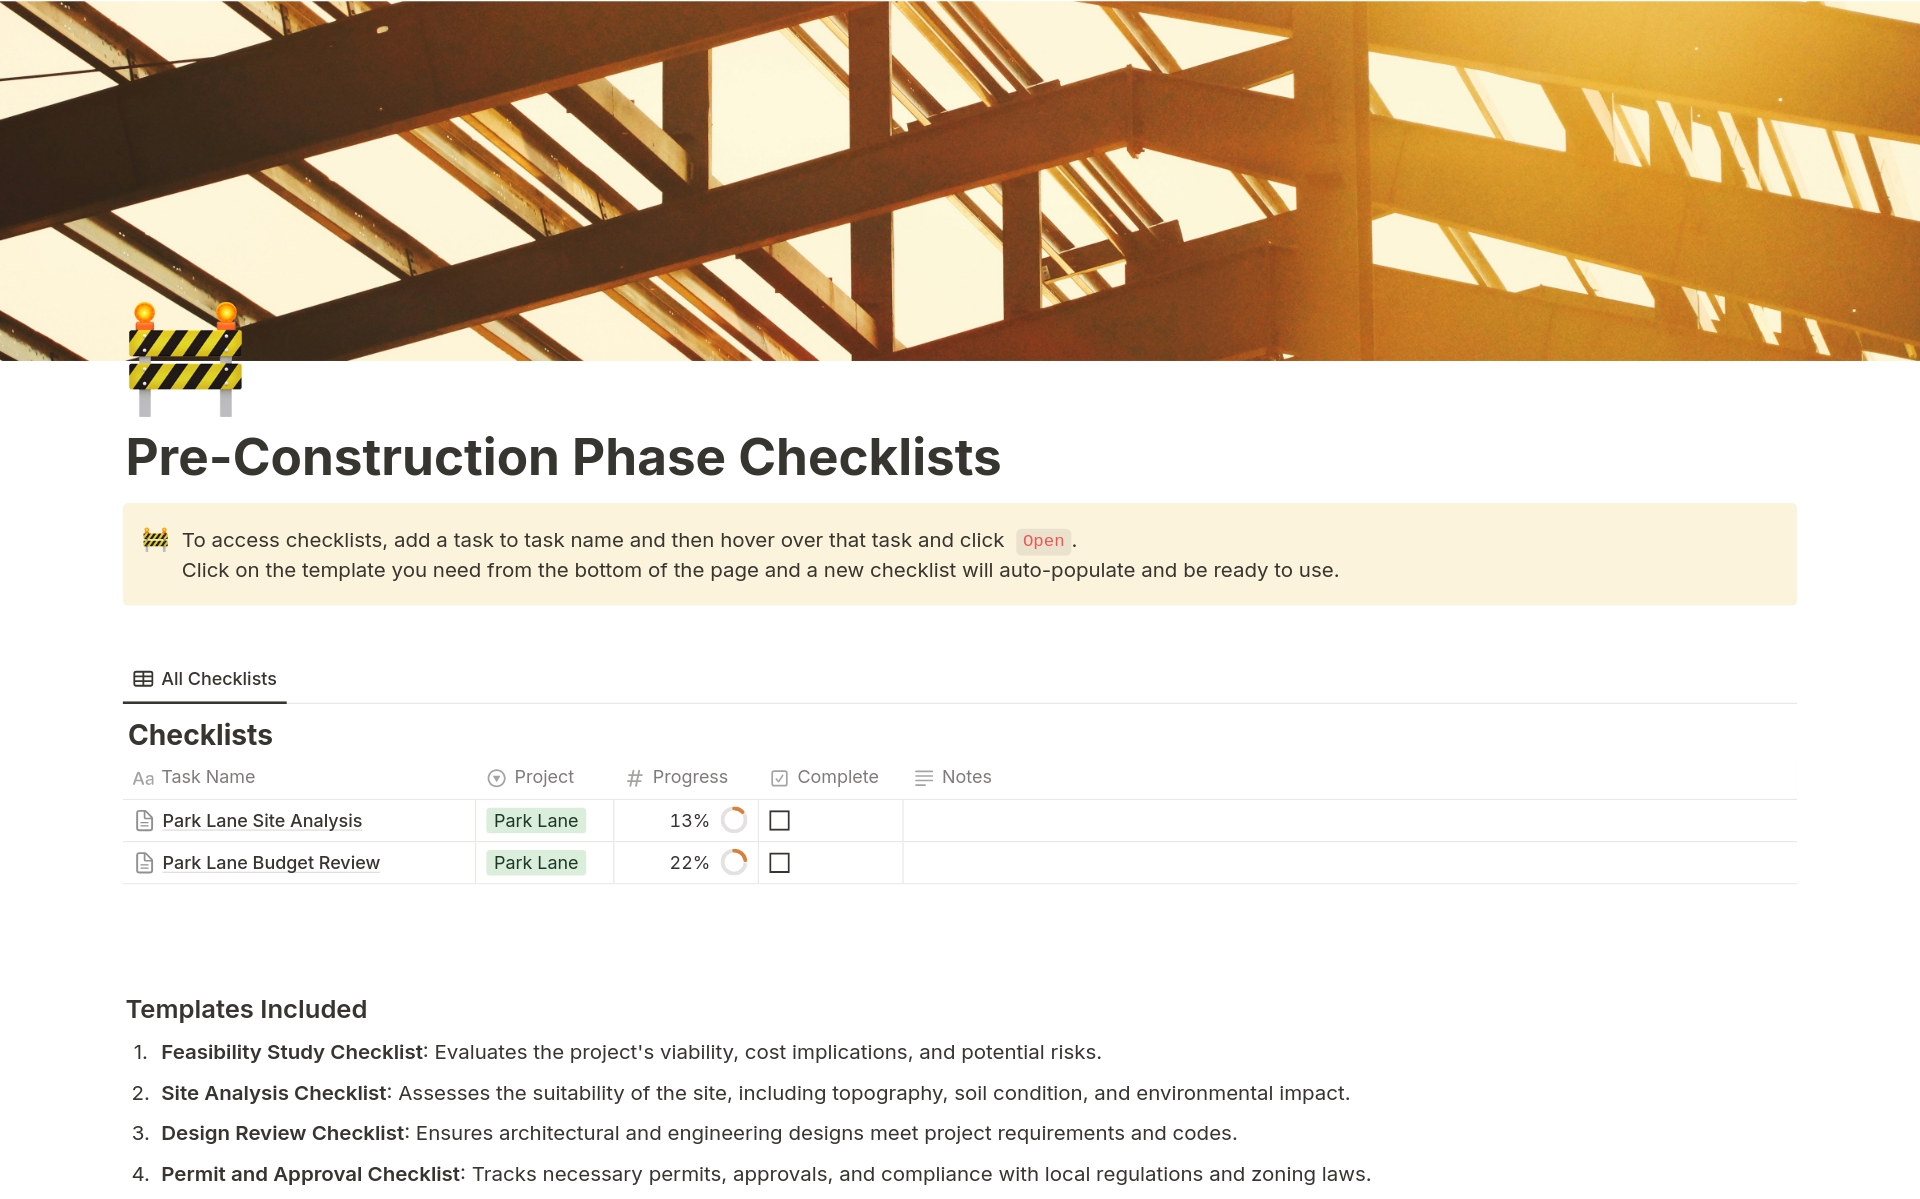 Use these 30 pre-construction checklists in your construction business on all new projects.